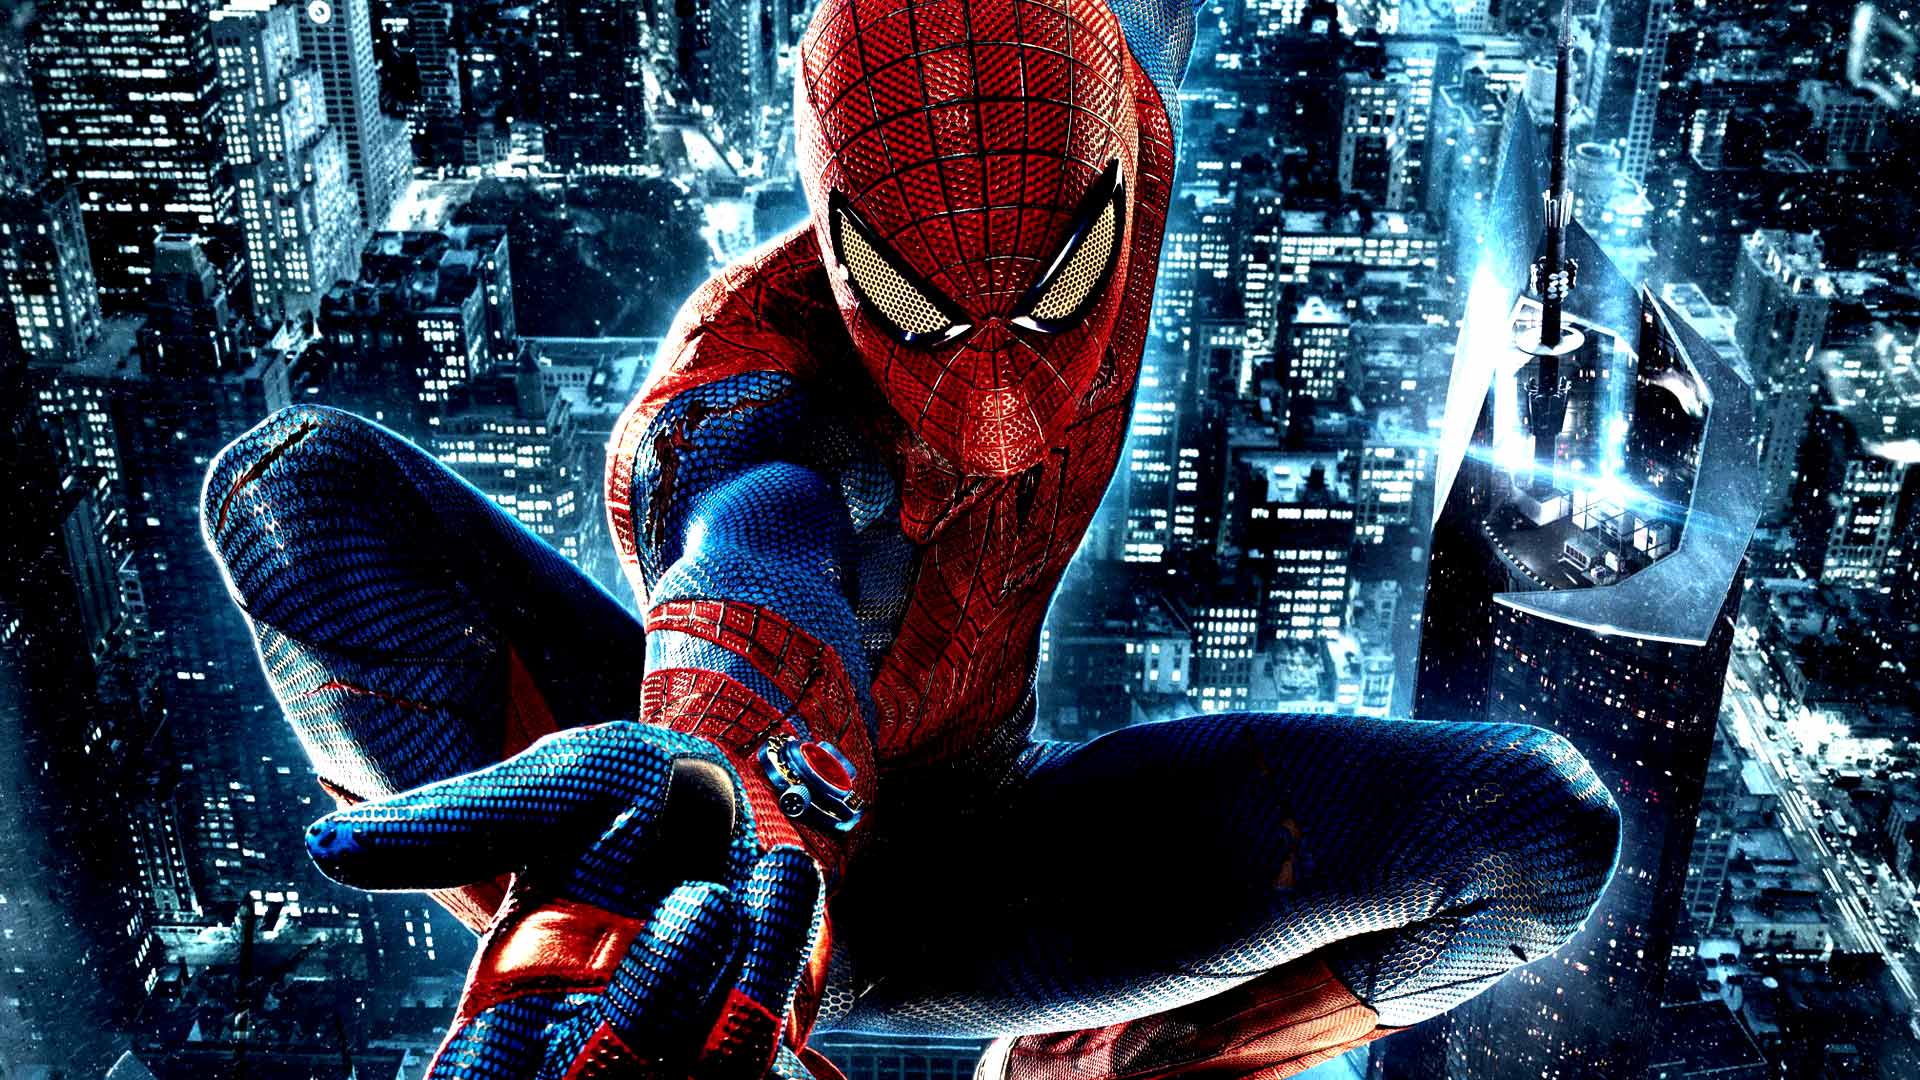 Download 2015 The Amazing Spiderman 2 Picture. HD Wallpaper